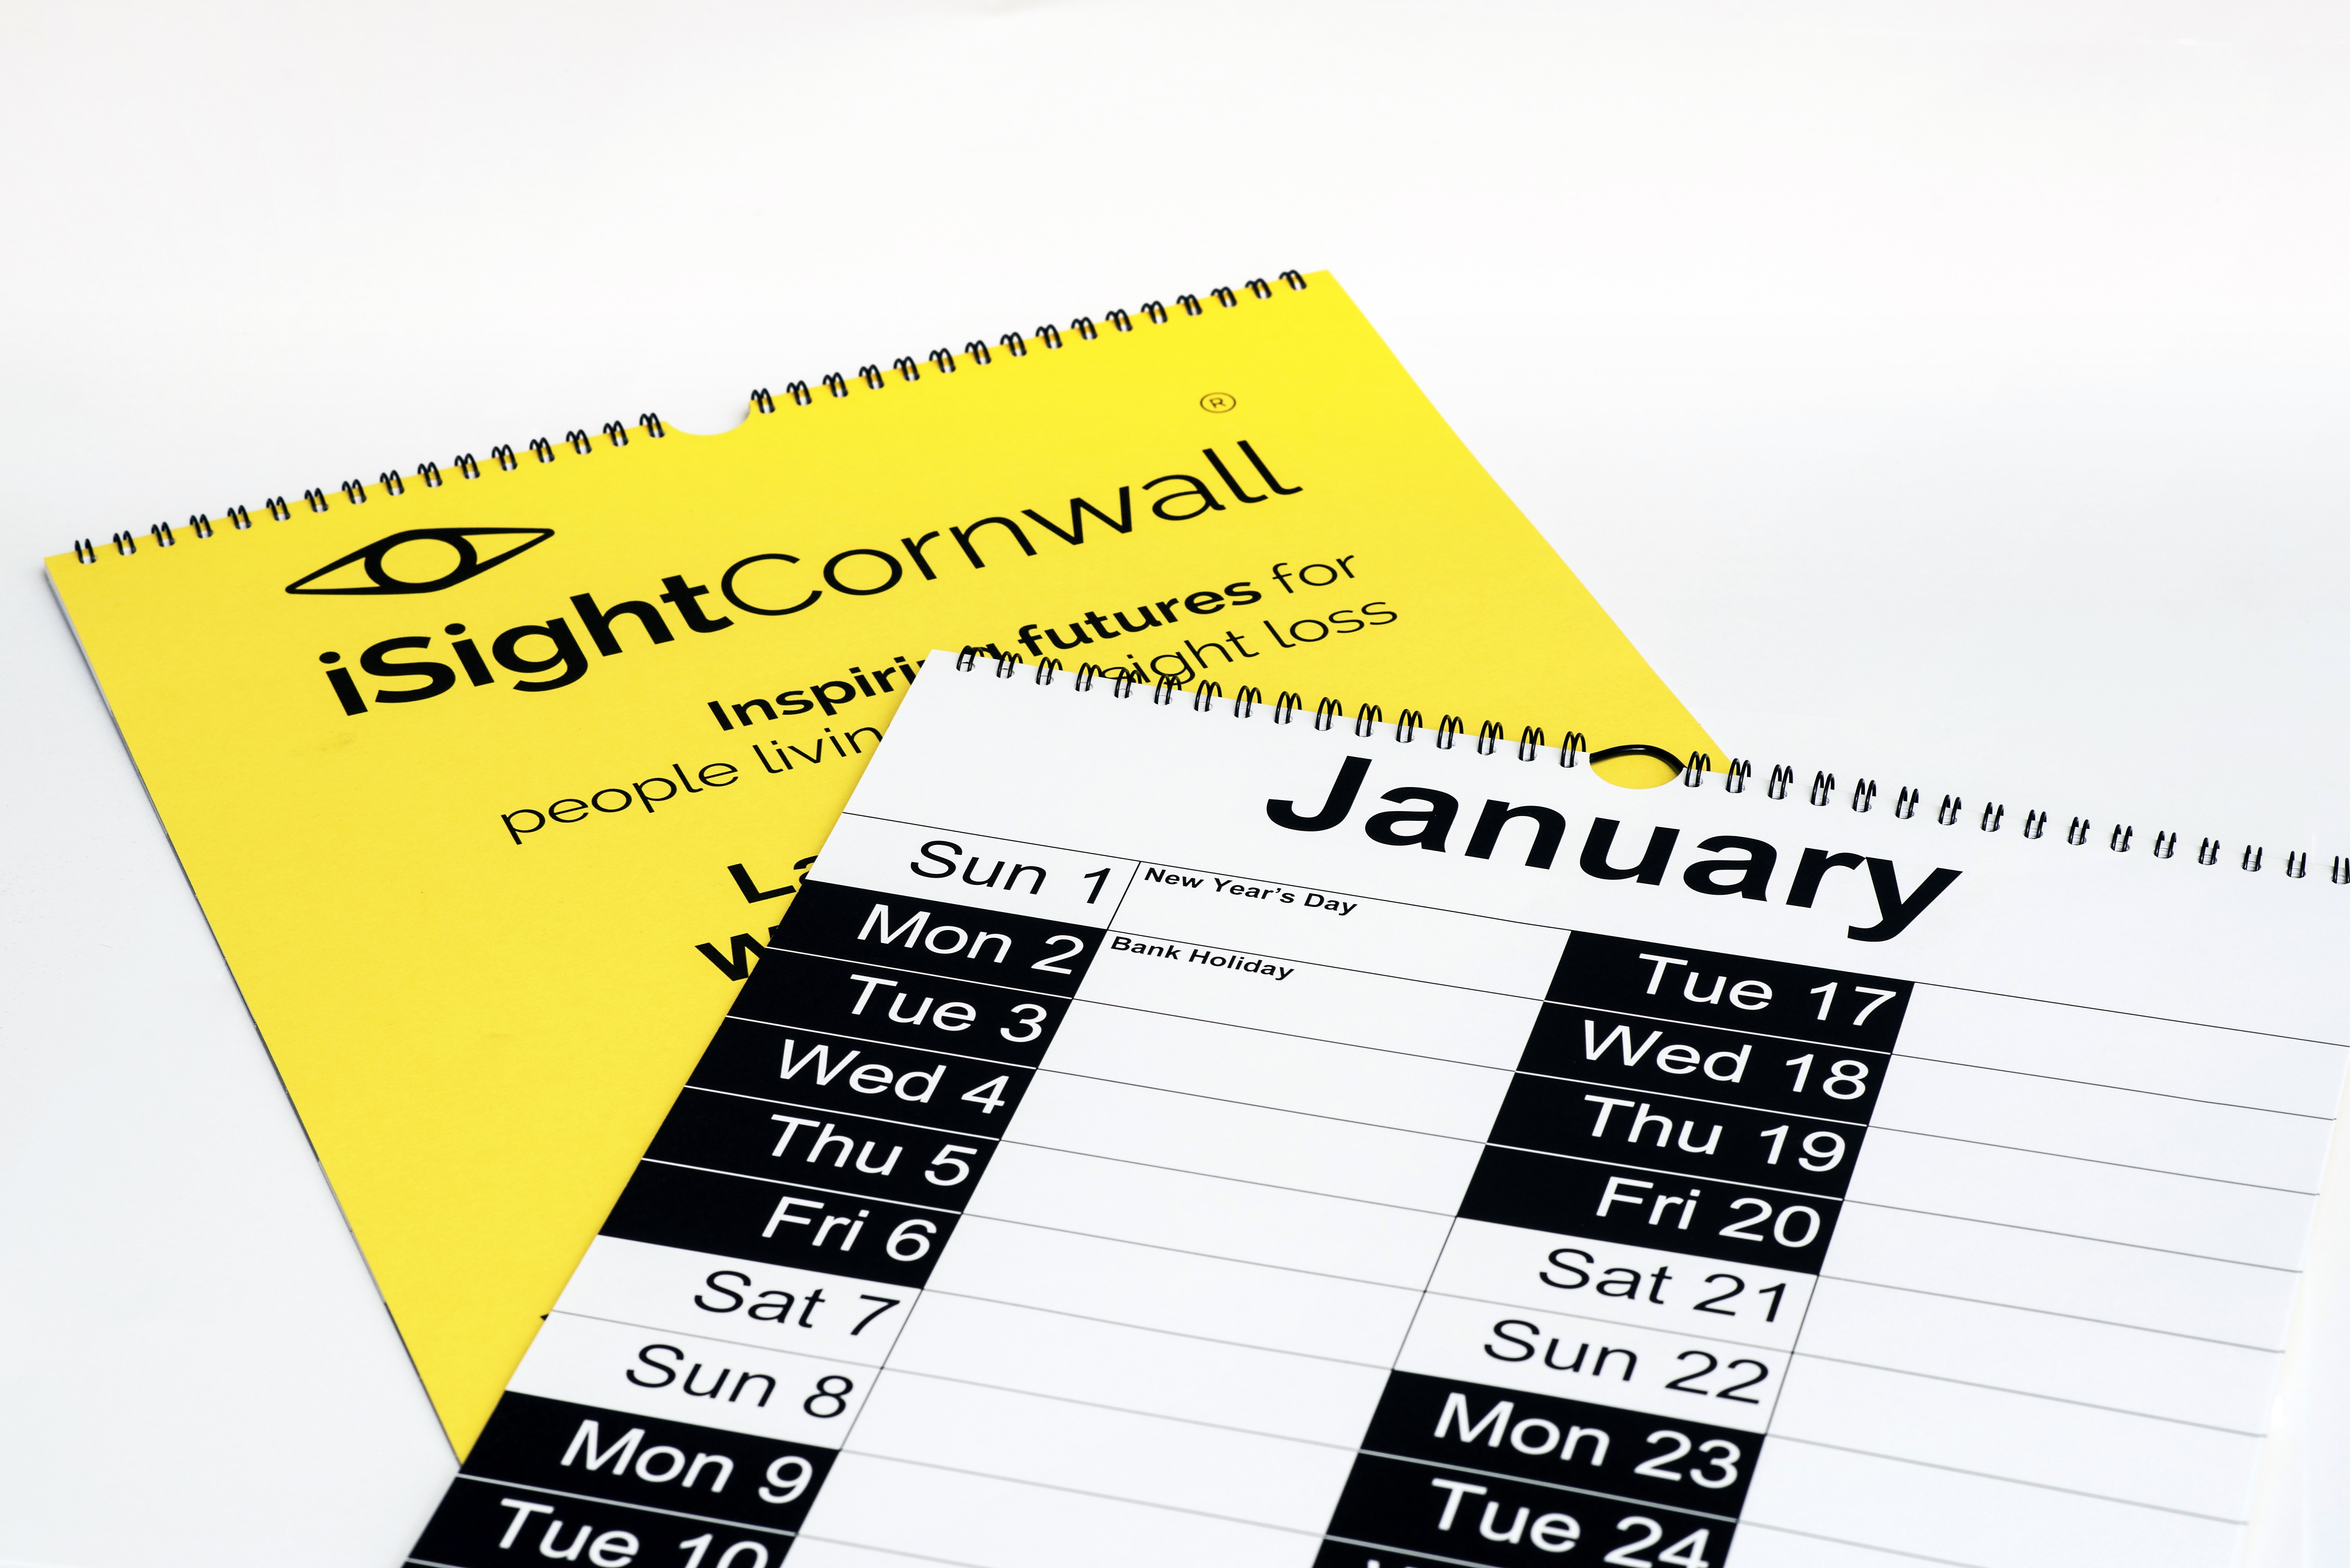 large-print-easy-to-see-wall-calendar-for-the-visually-impaired-isightcornwall